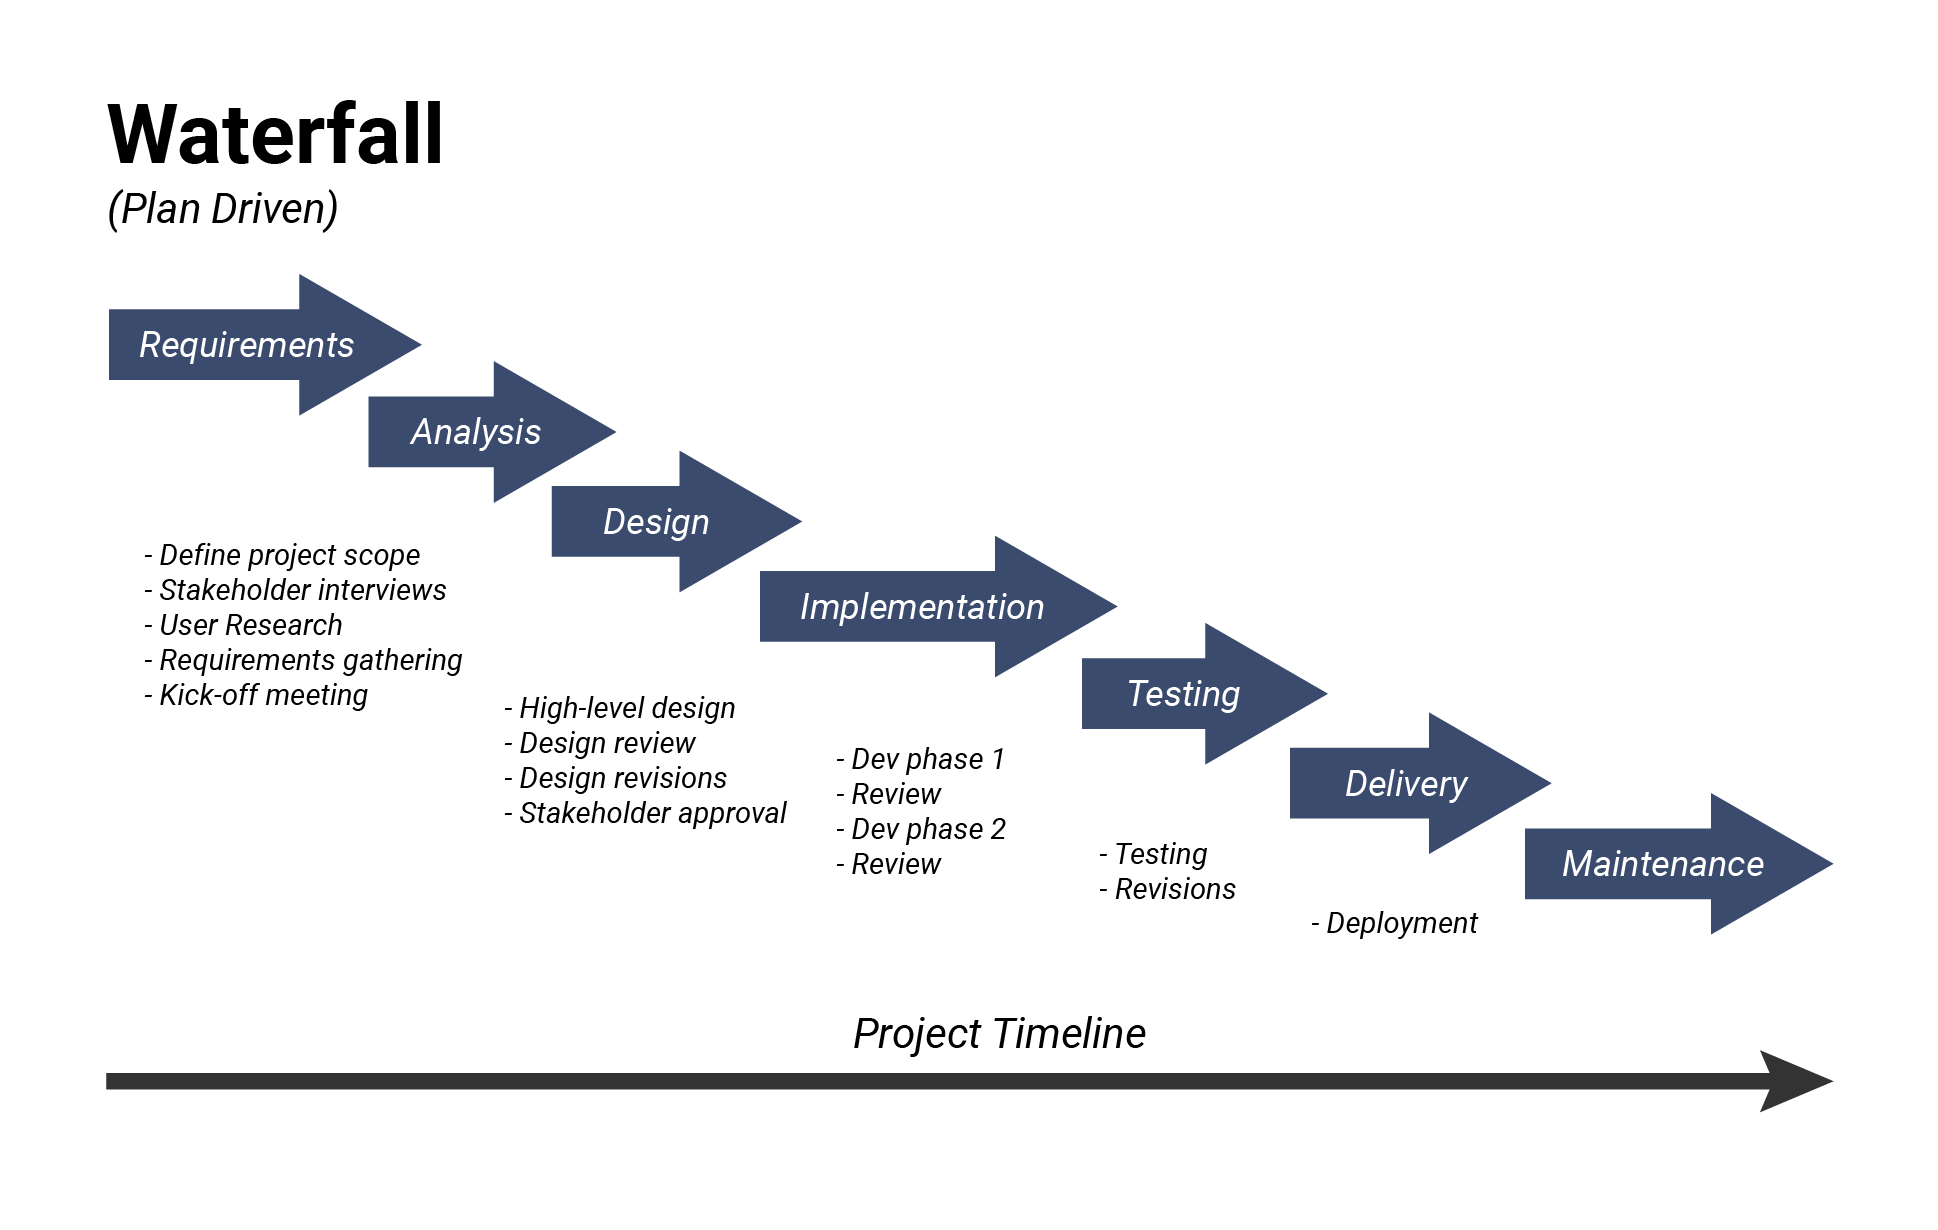 waterfall model example thesis